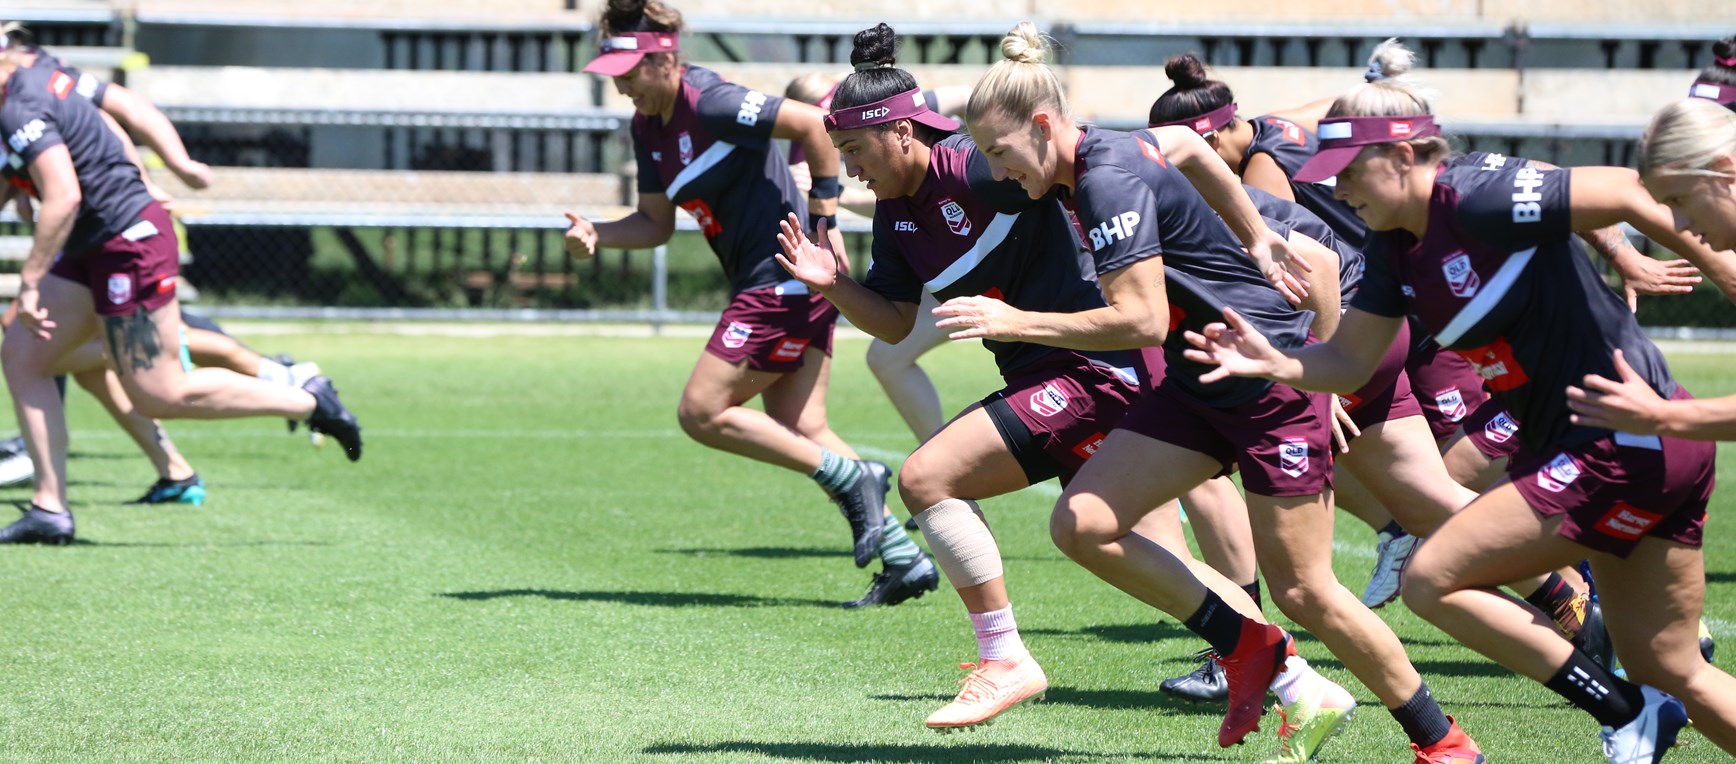 In pictures: Sunny Sunday training for Maroons